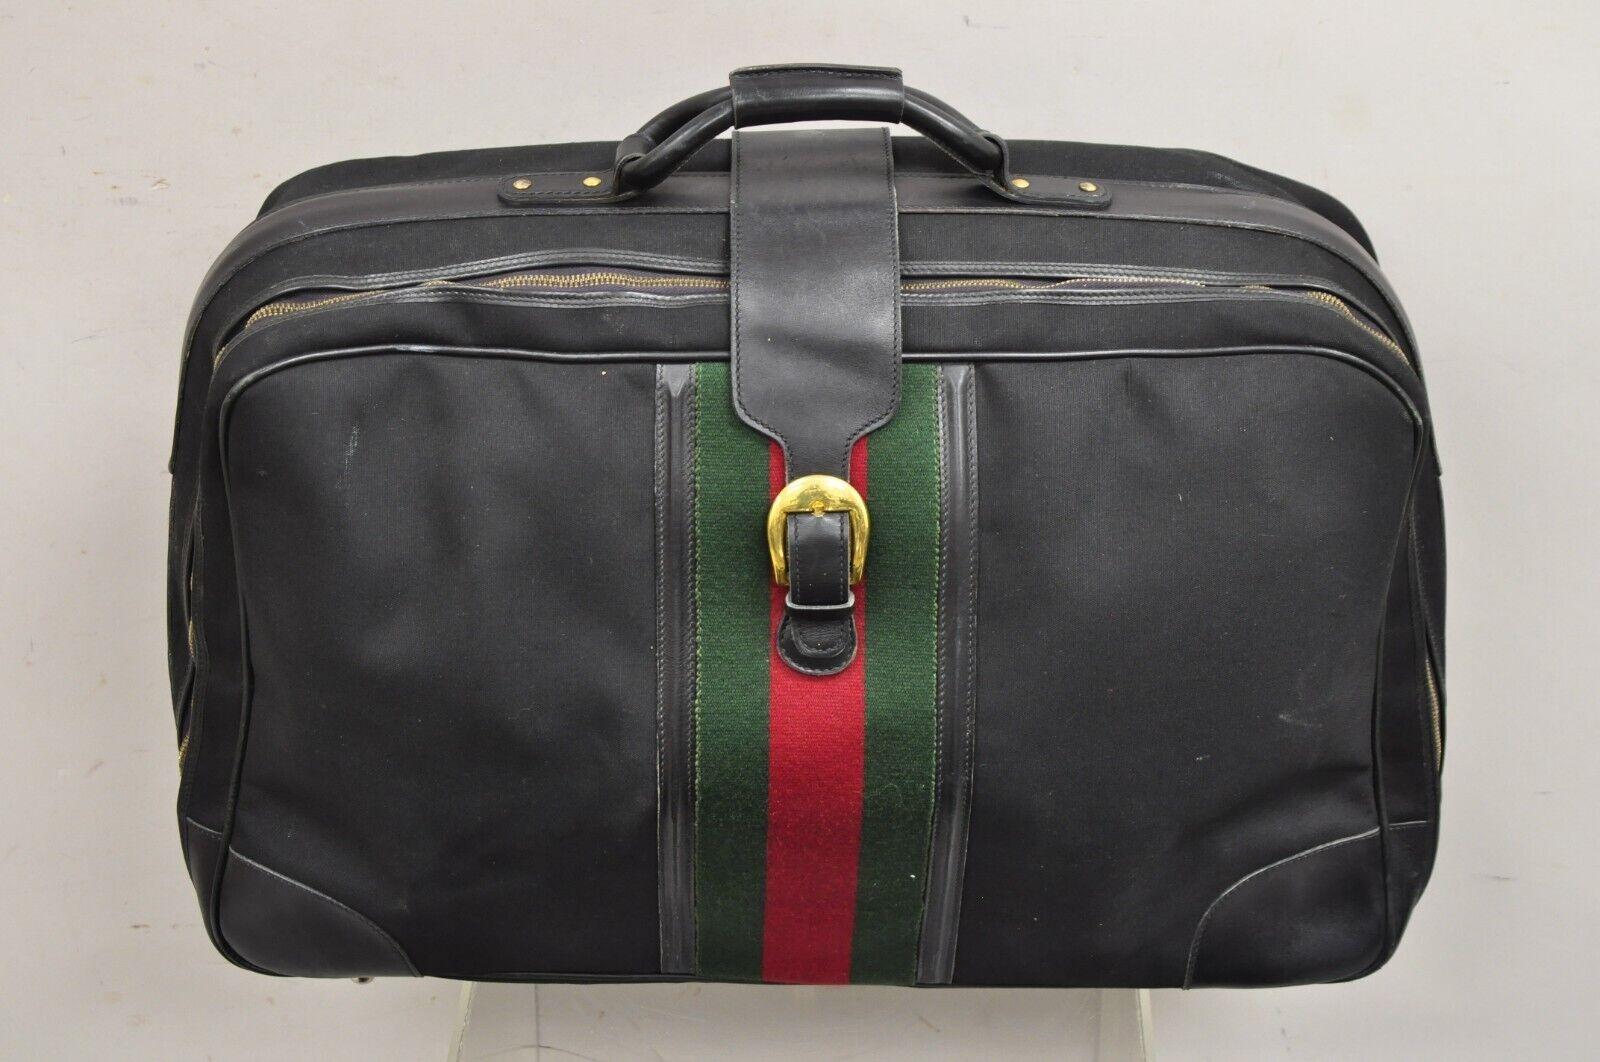 Vintage Gucci Black Canvas and Leather Suitcase Luggage His and Hers Set - 2 Pc Set (B.  Item featured is original vintage Gucci luggage, one larger and one smaller suitcase, gold gilt 